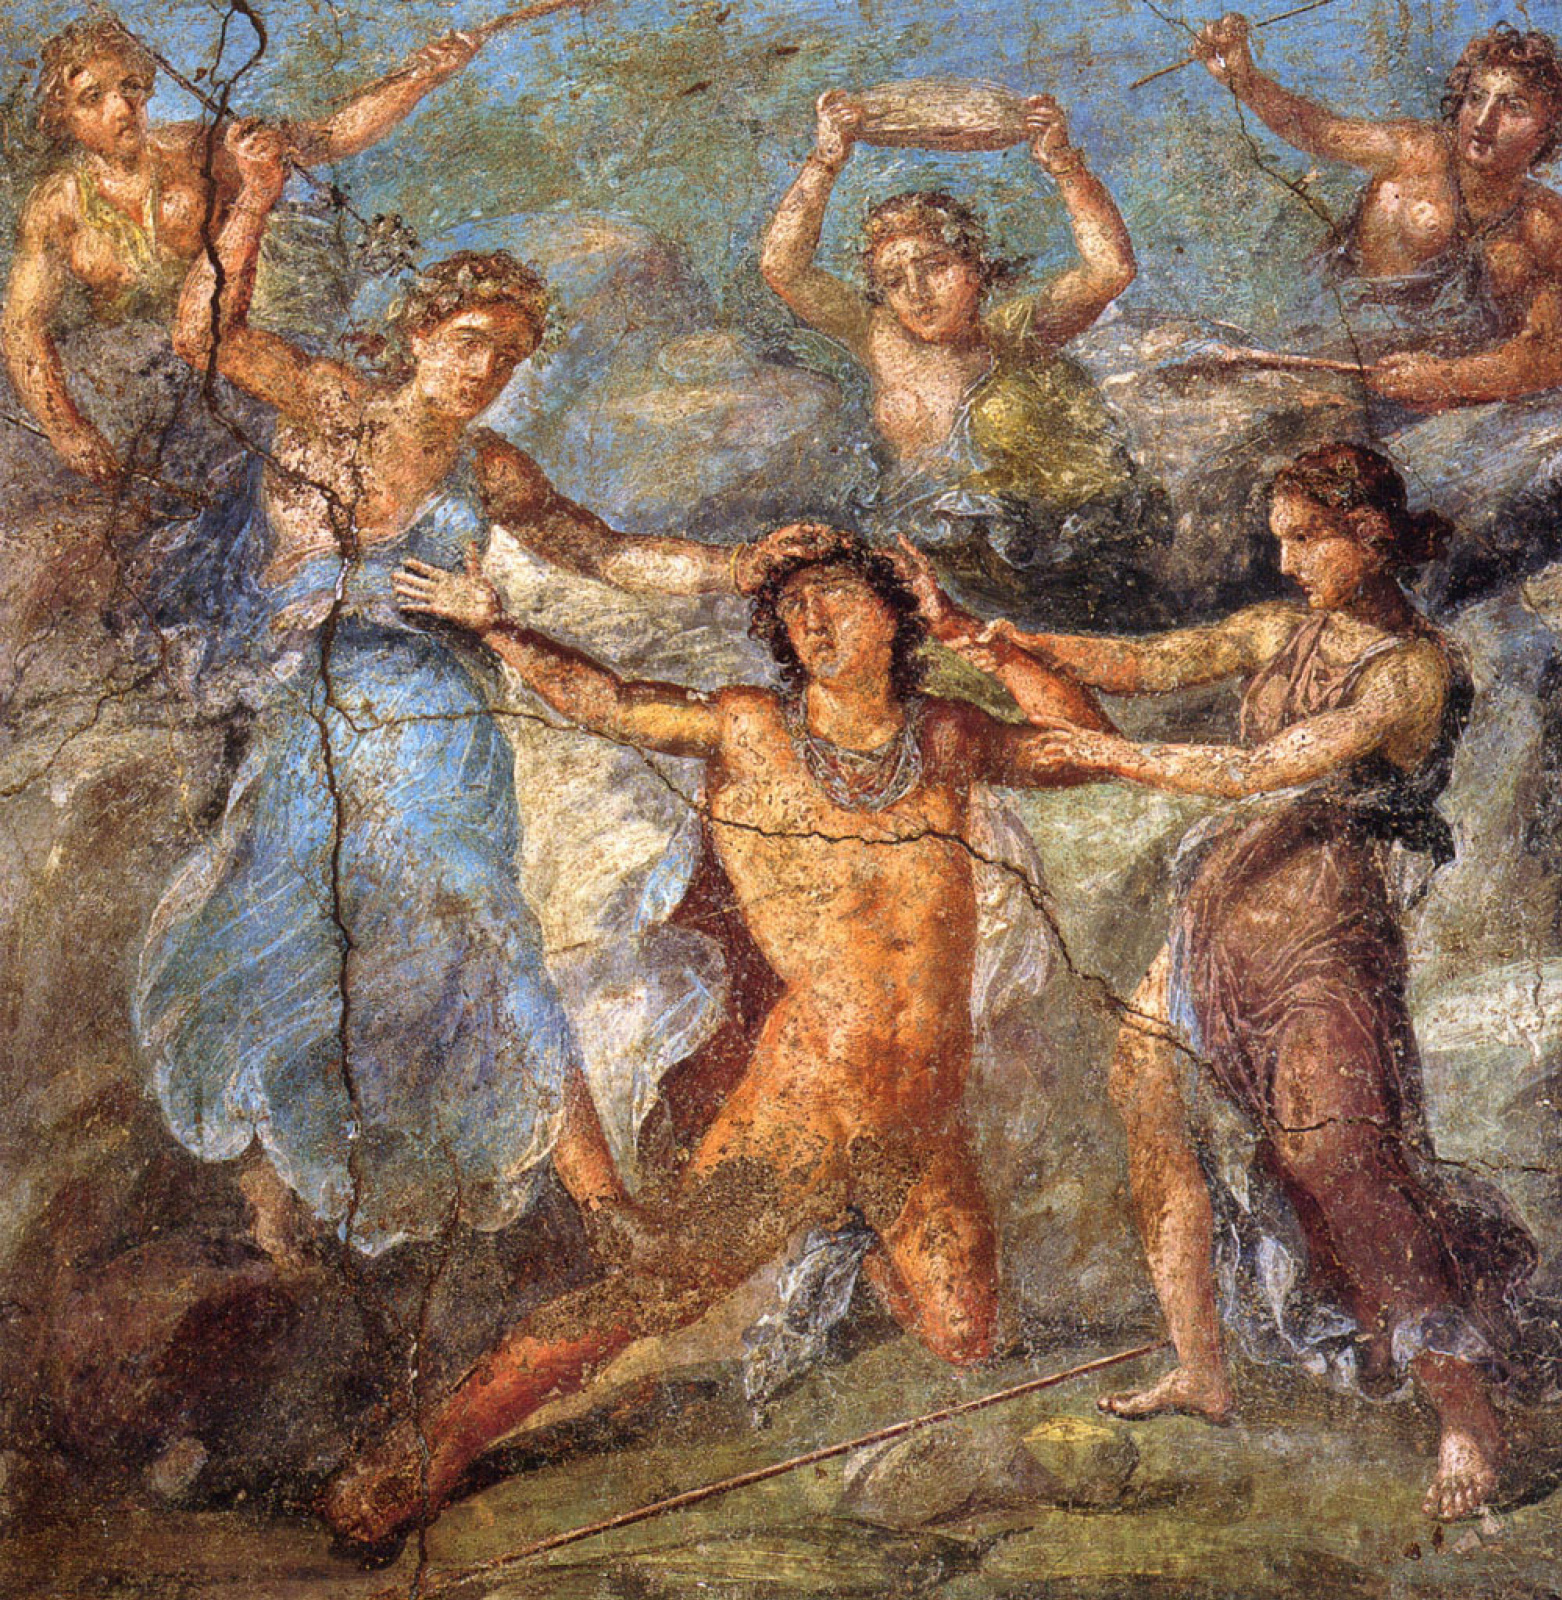 Frescoes and Ash. Painting and Design in Ancient Pompeii | Arthive